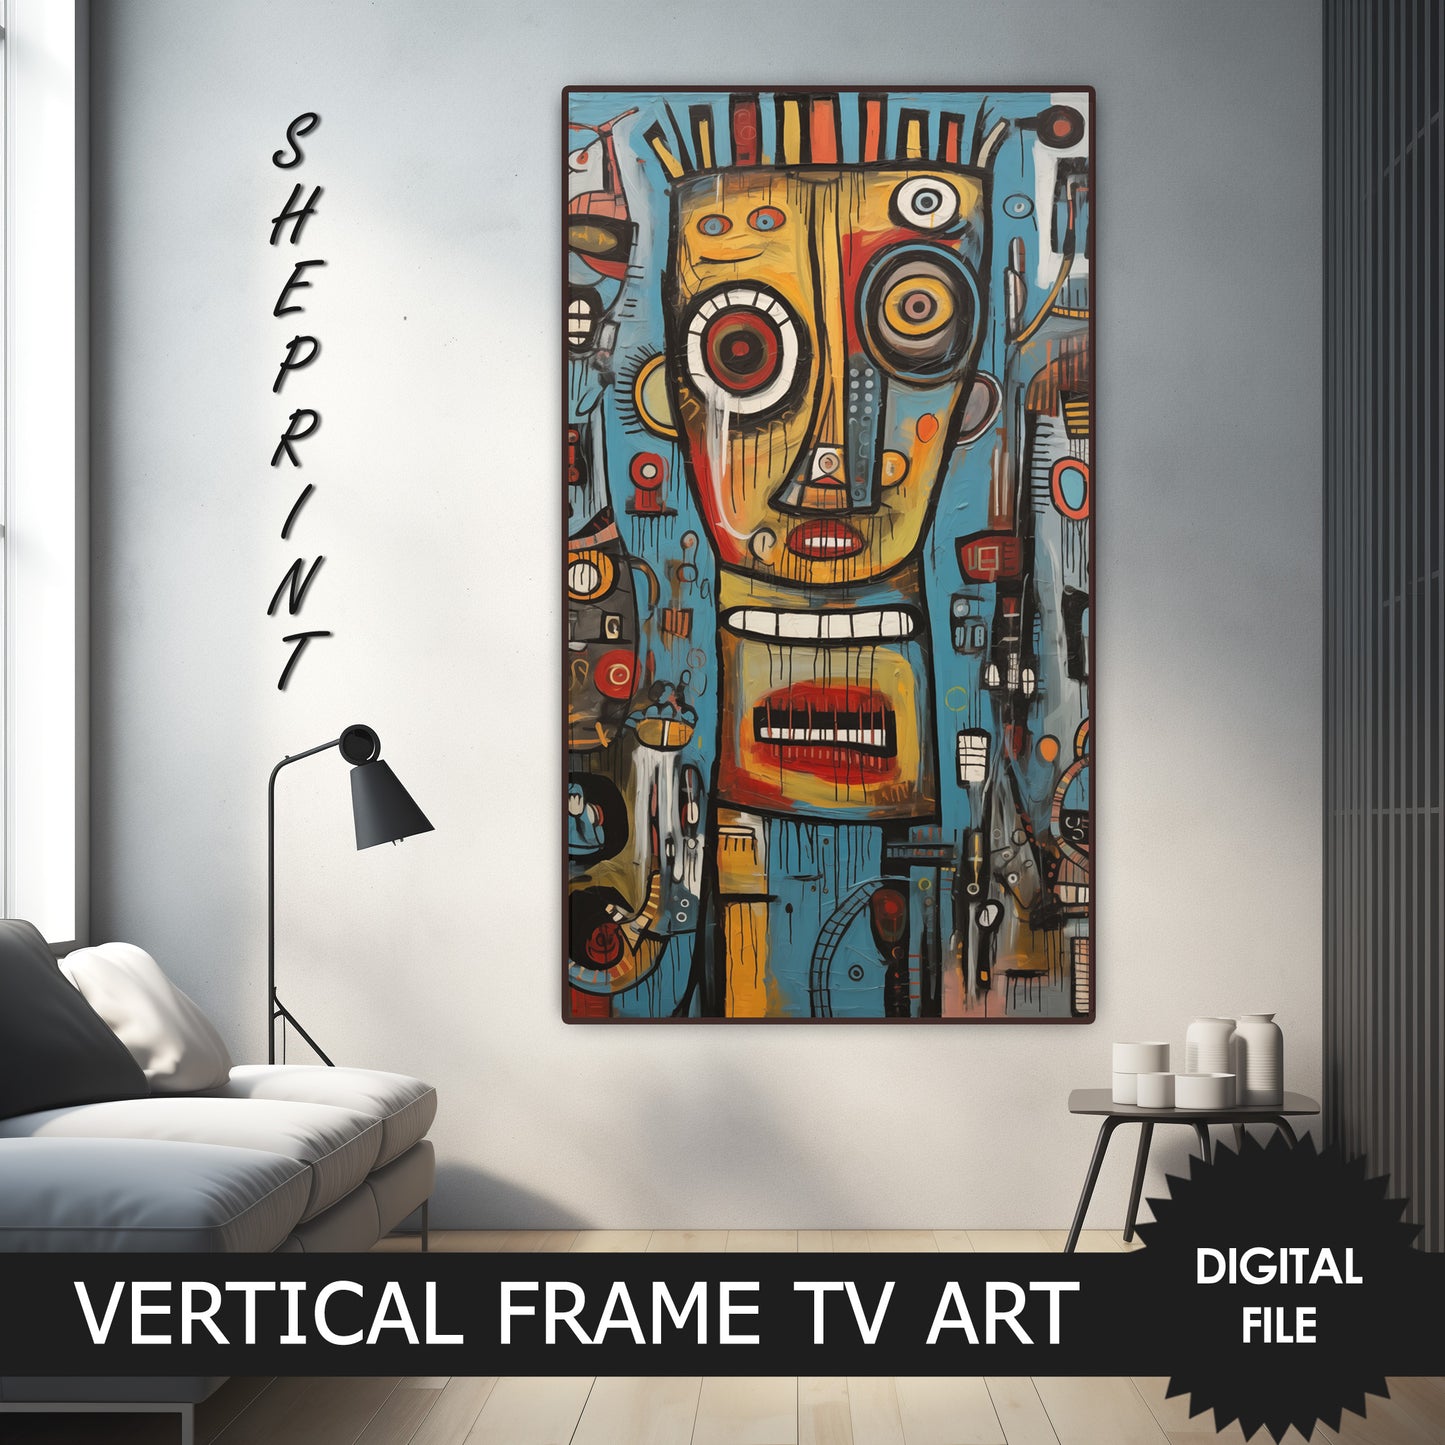 Vertical Frame TV Art, Abstract Face Art Brut Oil Painting, Outsider Art preview on Samsung Frame TV when mounted vertically